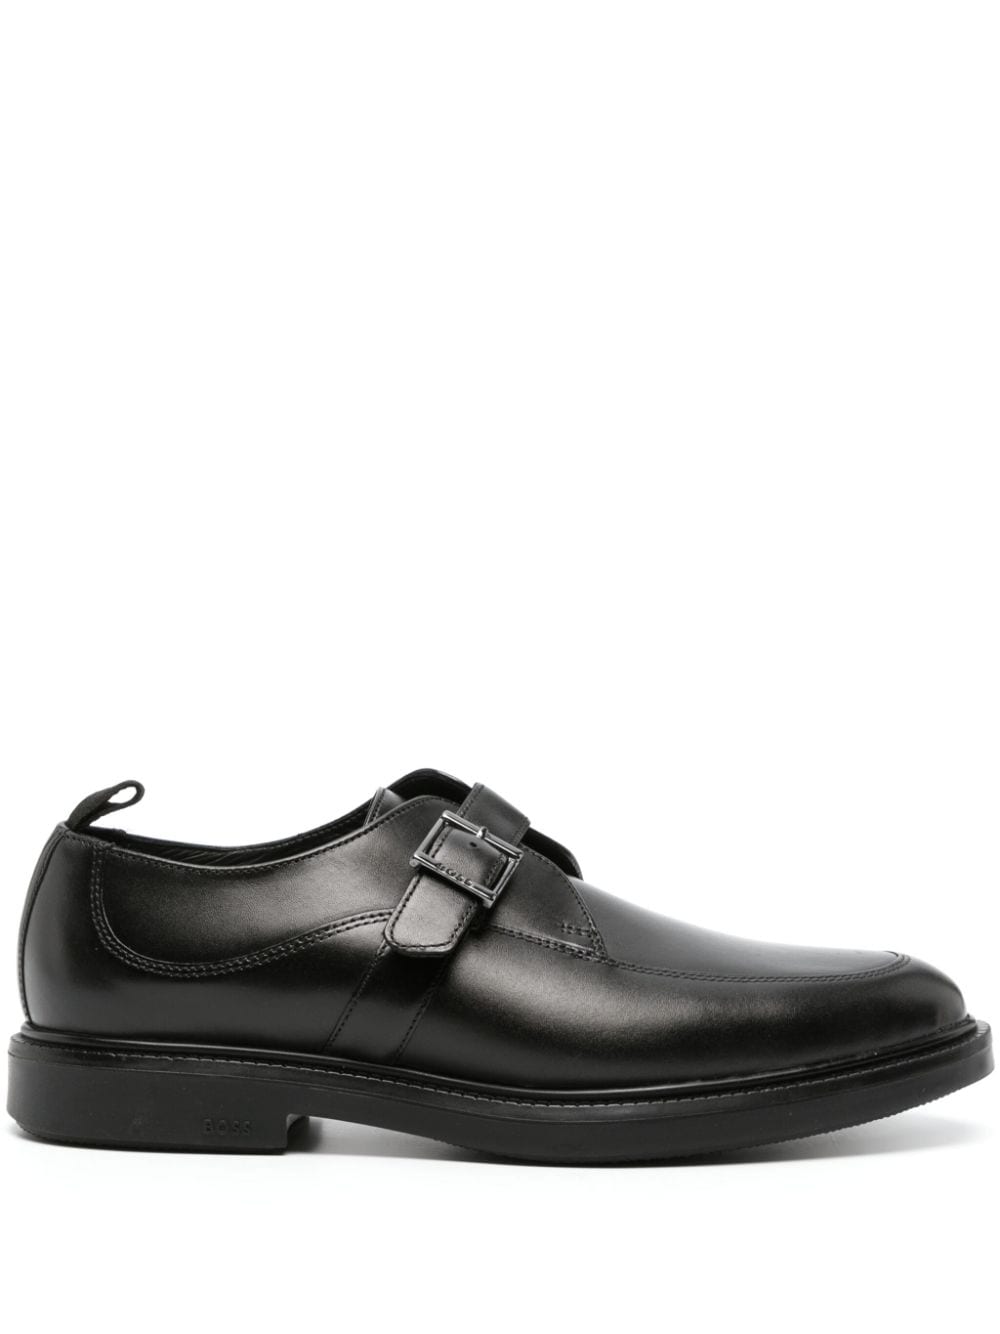 Hugo Boss Larry Leather Oxford Shoes In Black